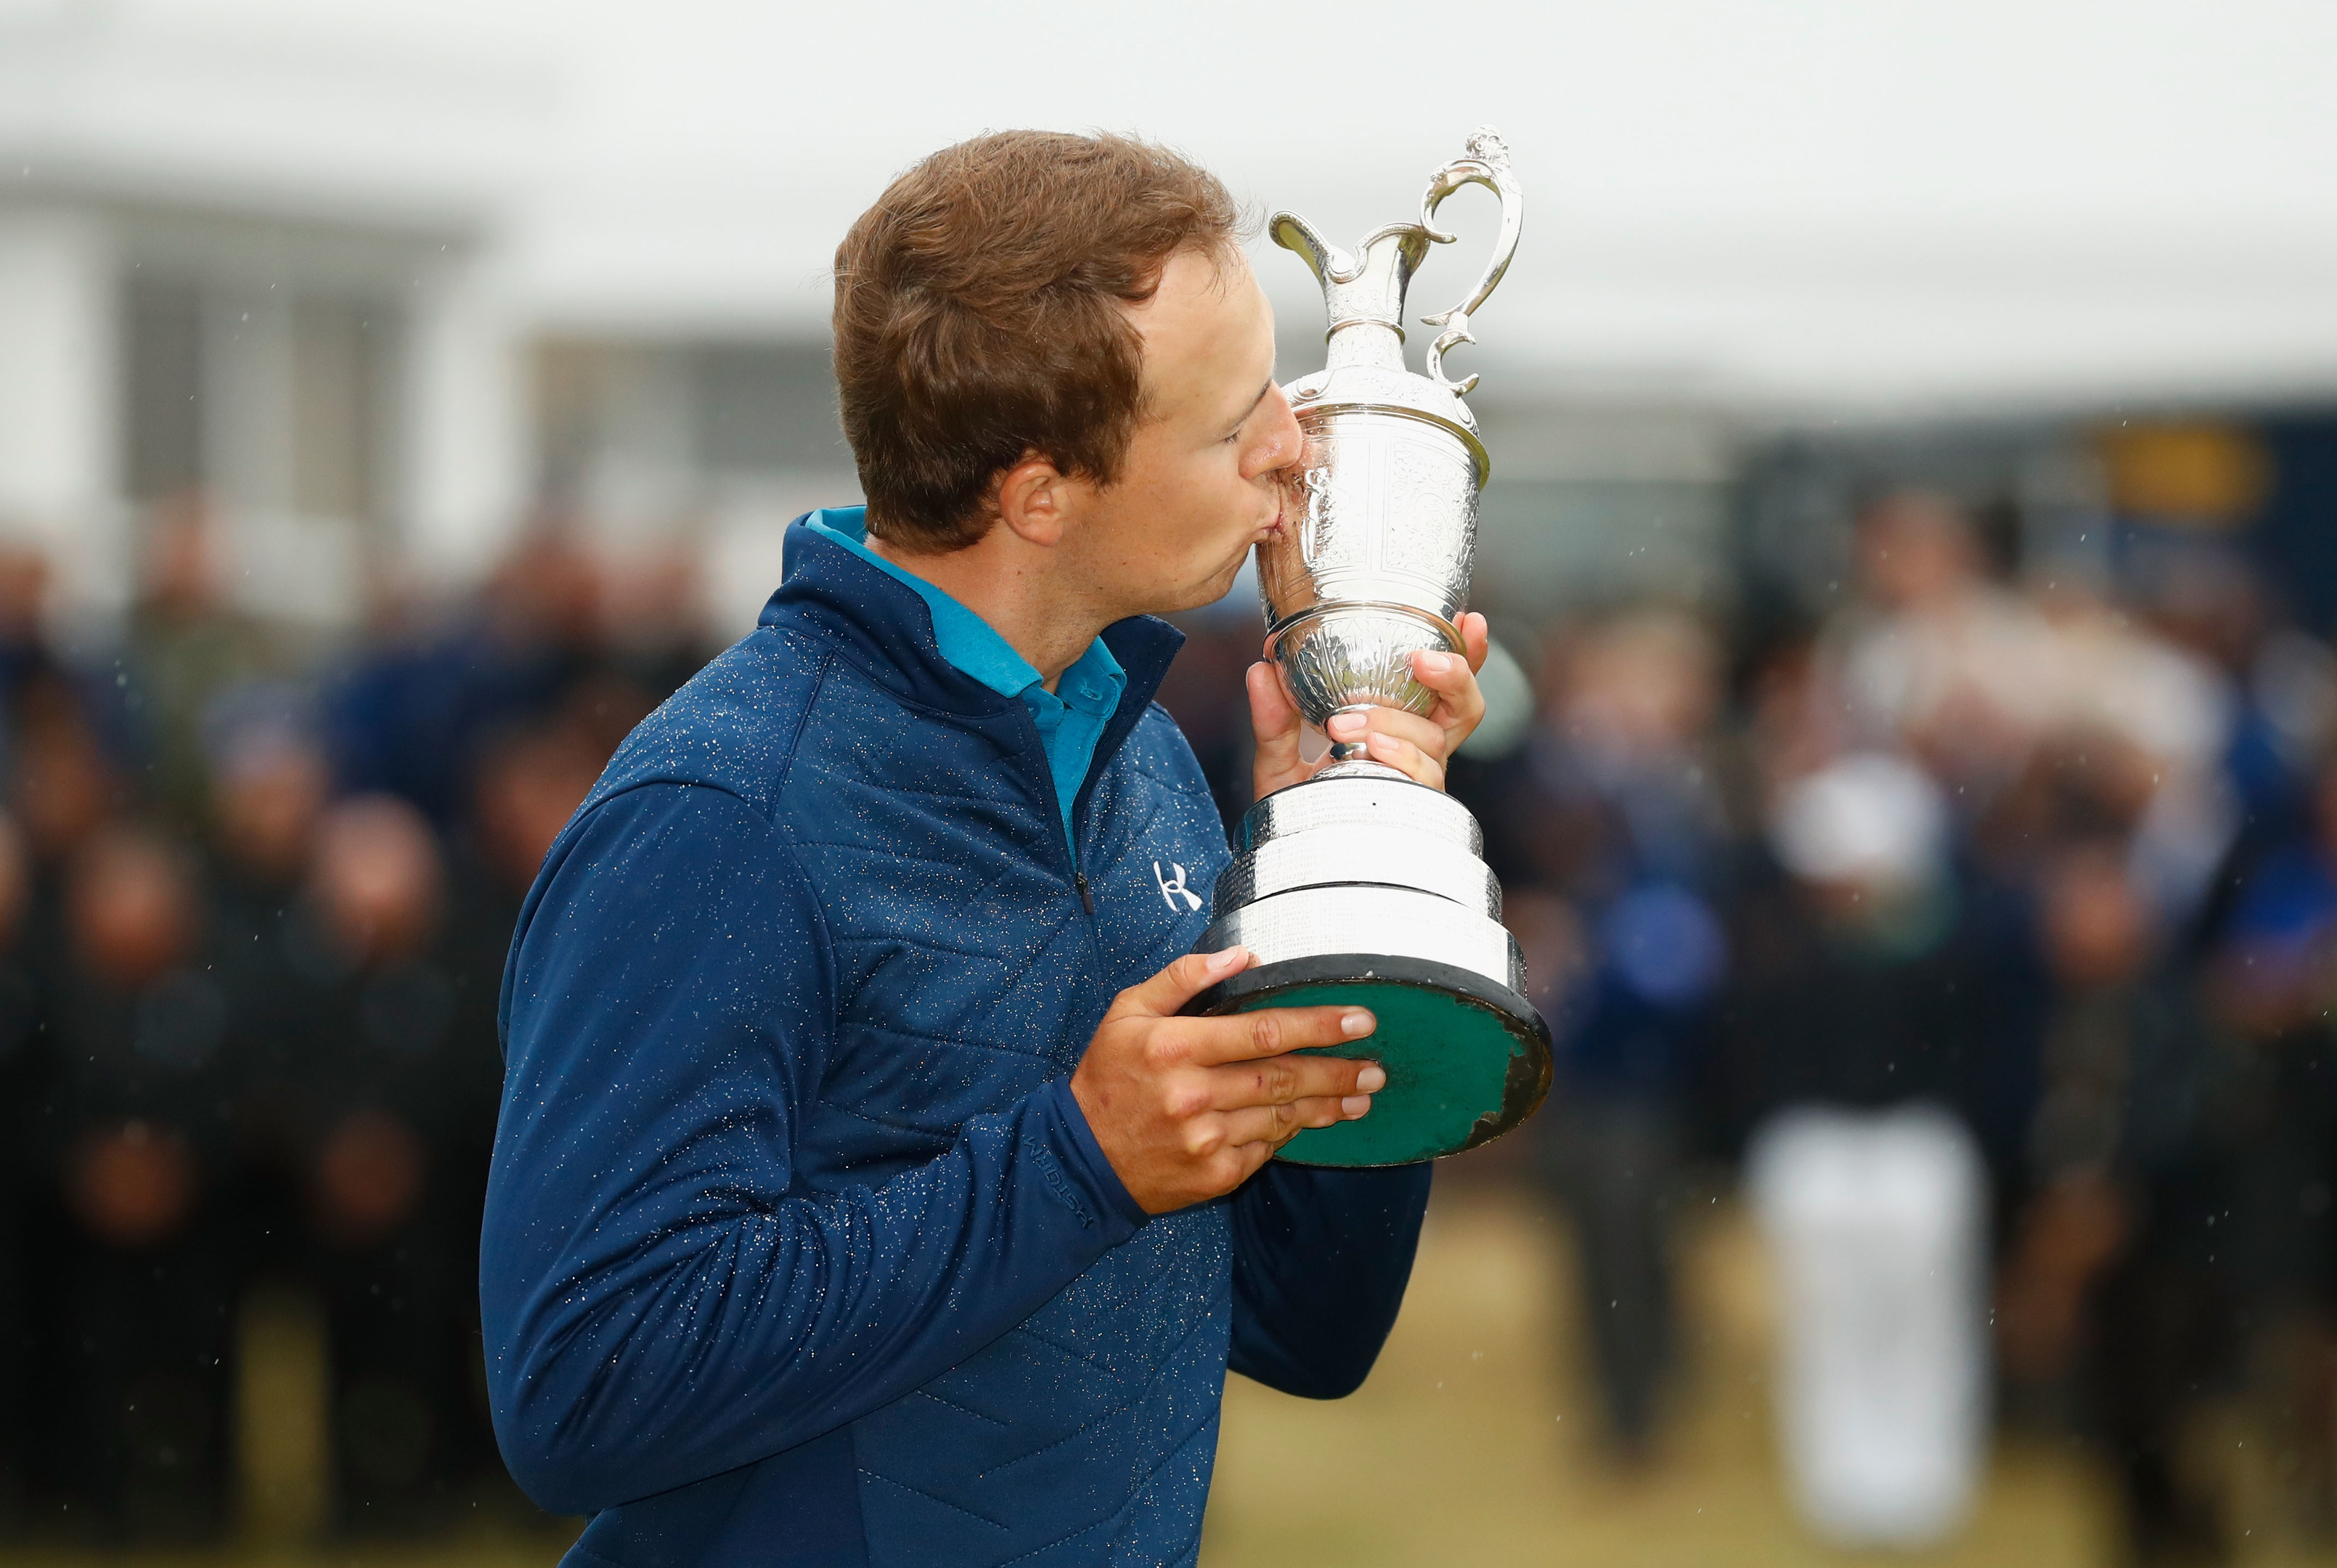 Jordan Spieth of the United States kisses the Claret Jug following his victory in the 146th Open Championship at Royal Birkdale.